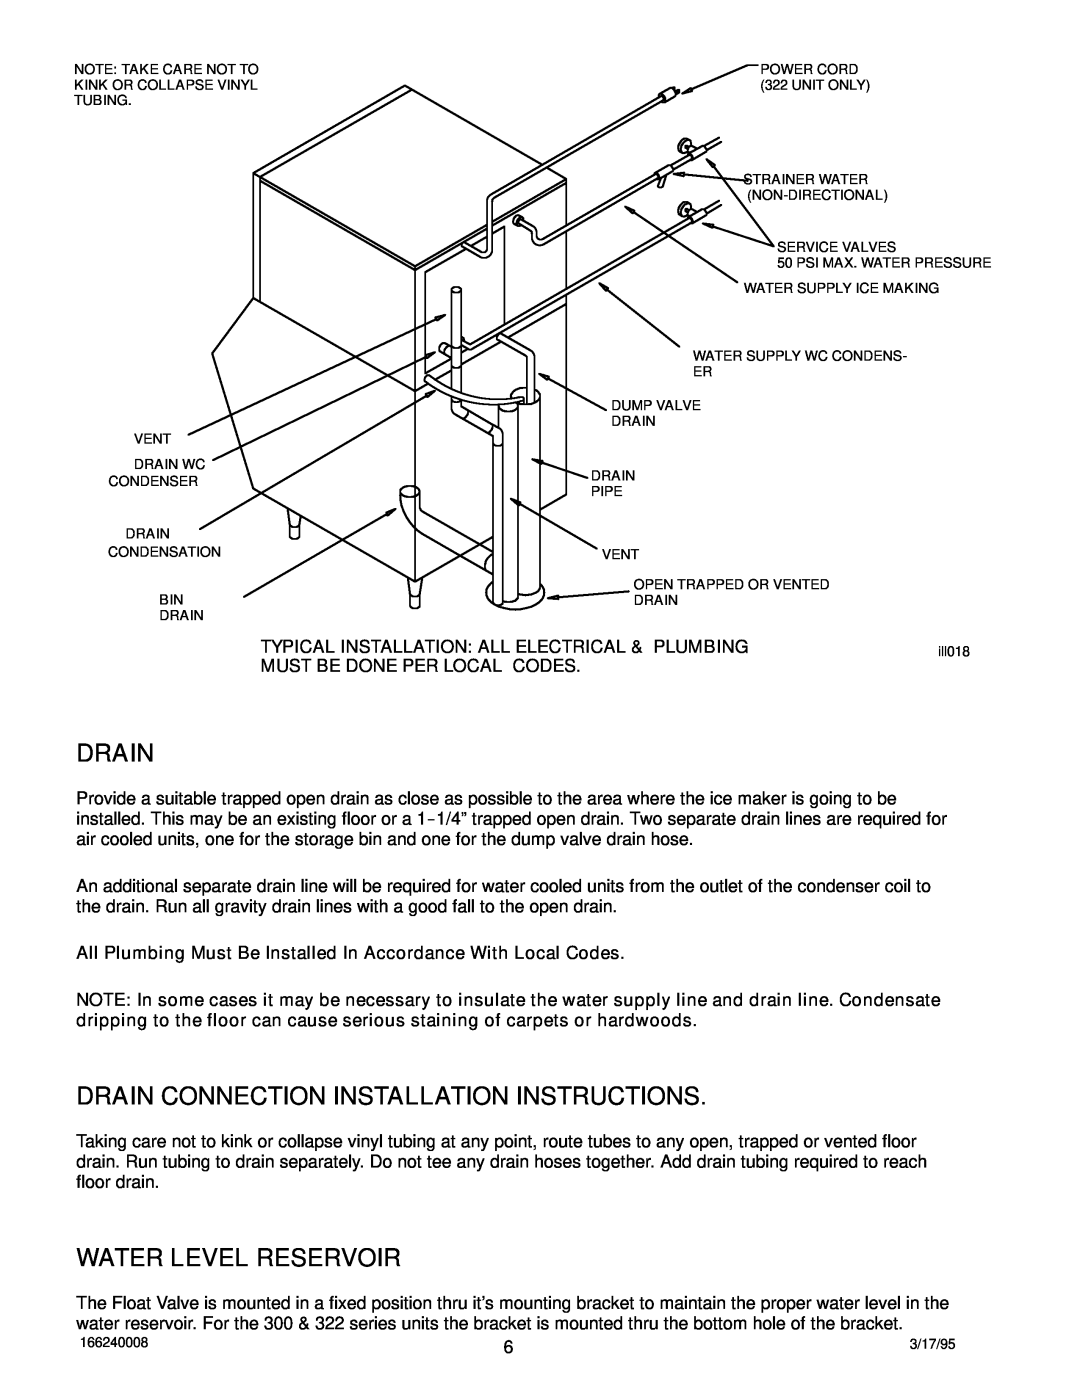 Cornelius 322 manual Drain Connection Installation Instructions, Water Level Reservoir, Must Be Done Per Local Codes 